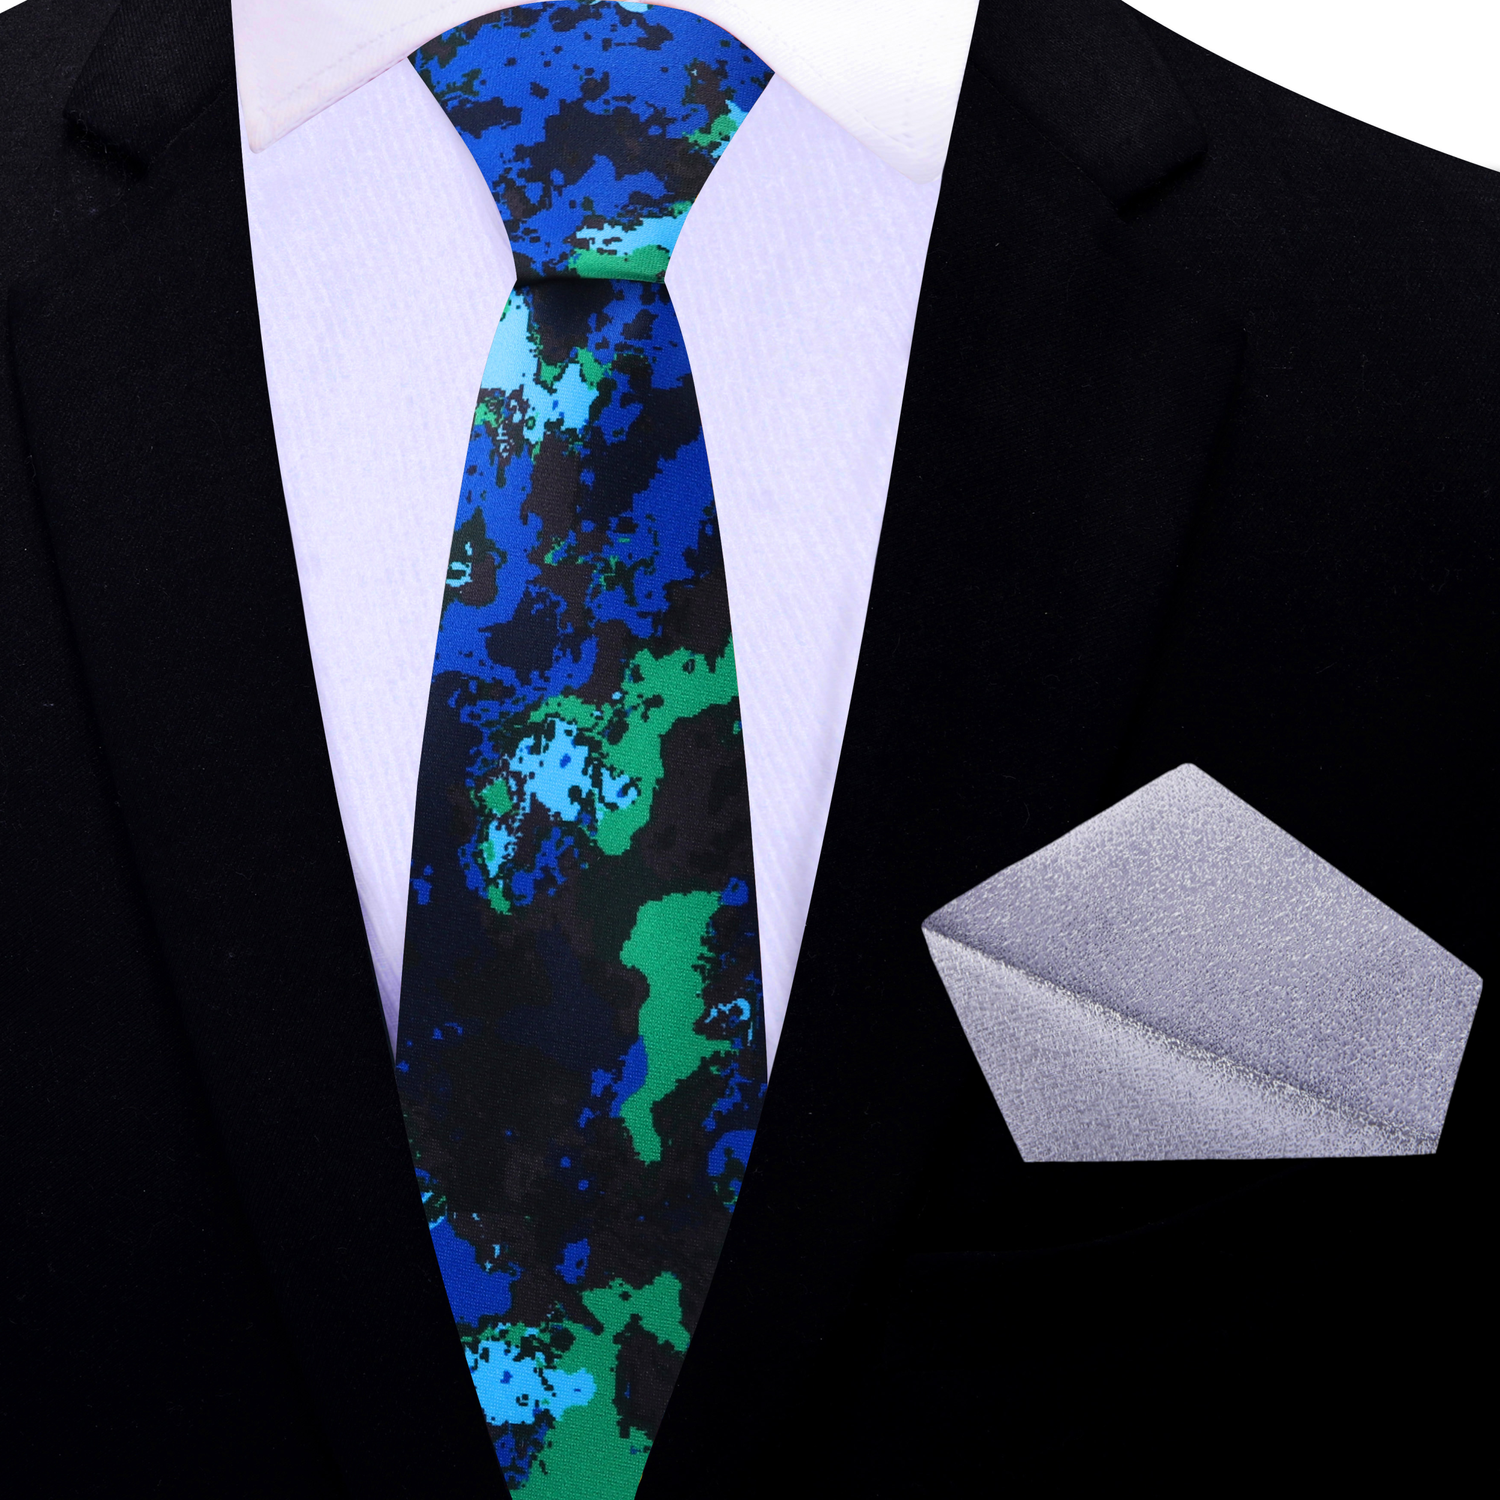 Thin Tie: Black, Blue and Green Ink Blot Pattern Necktie and Silver Pocket Square